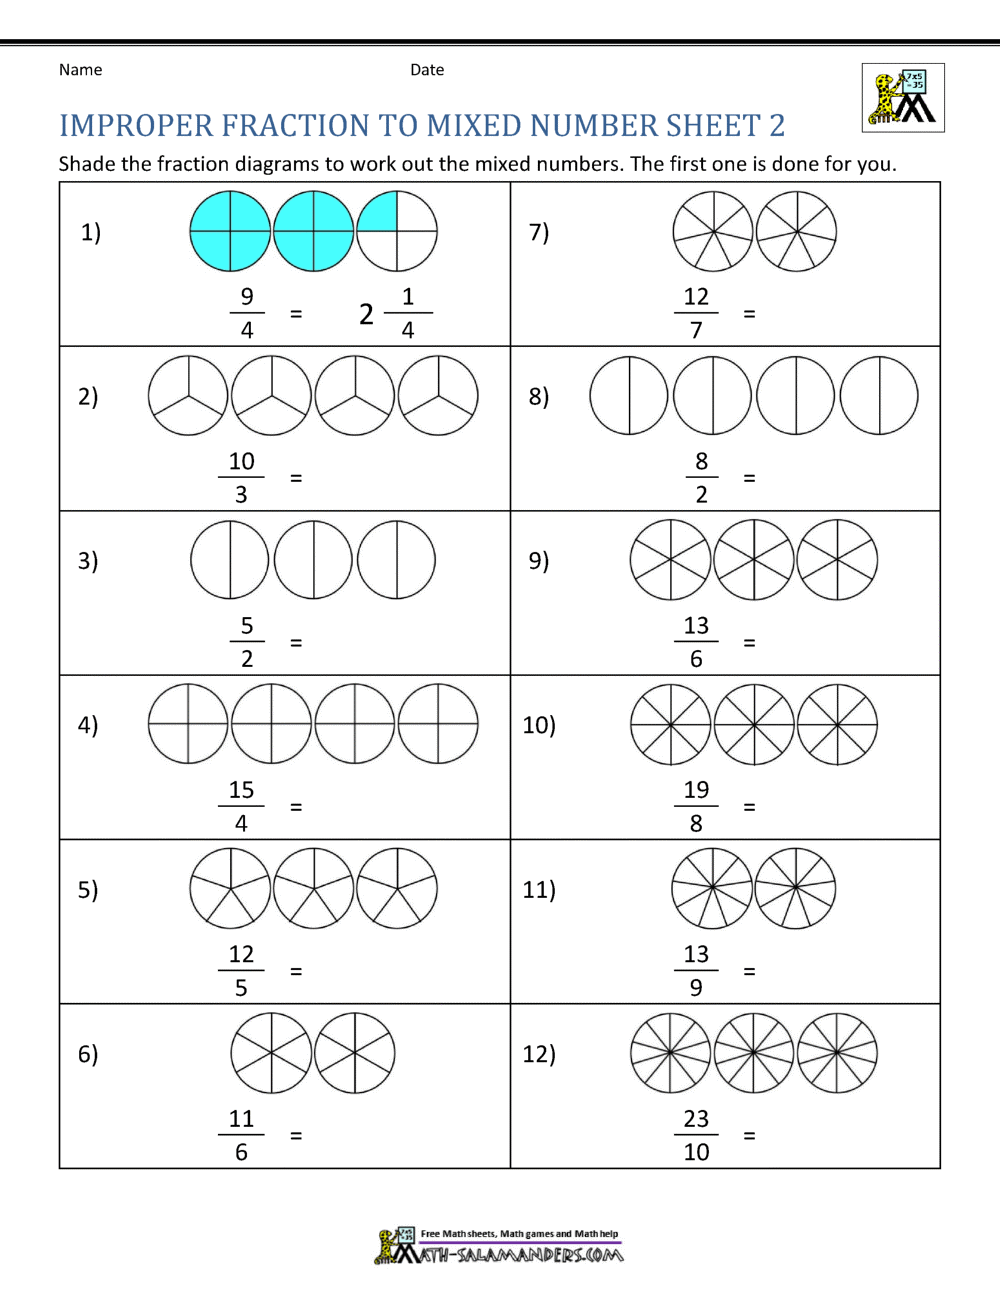 converting-improper-fractions-to-mixed-numbers-worksheets